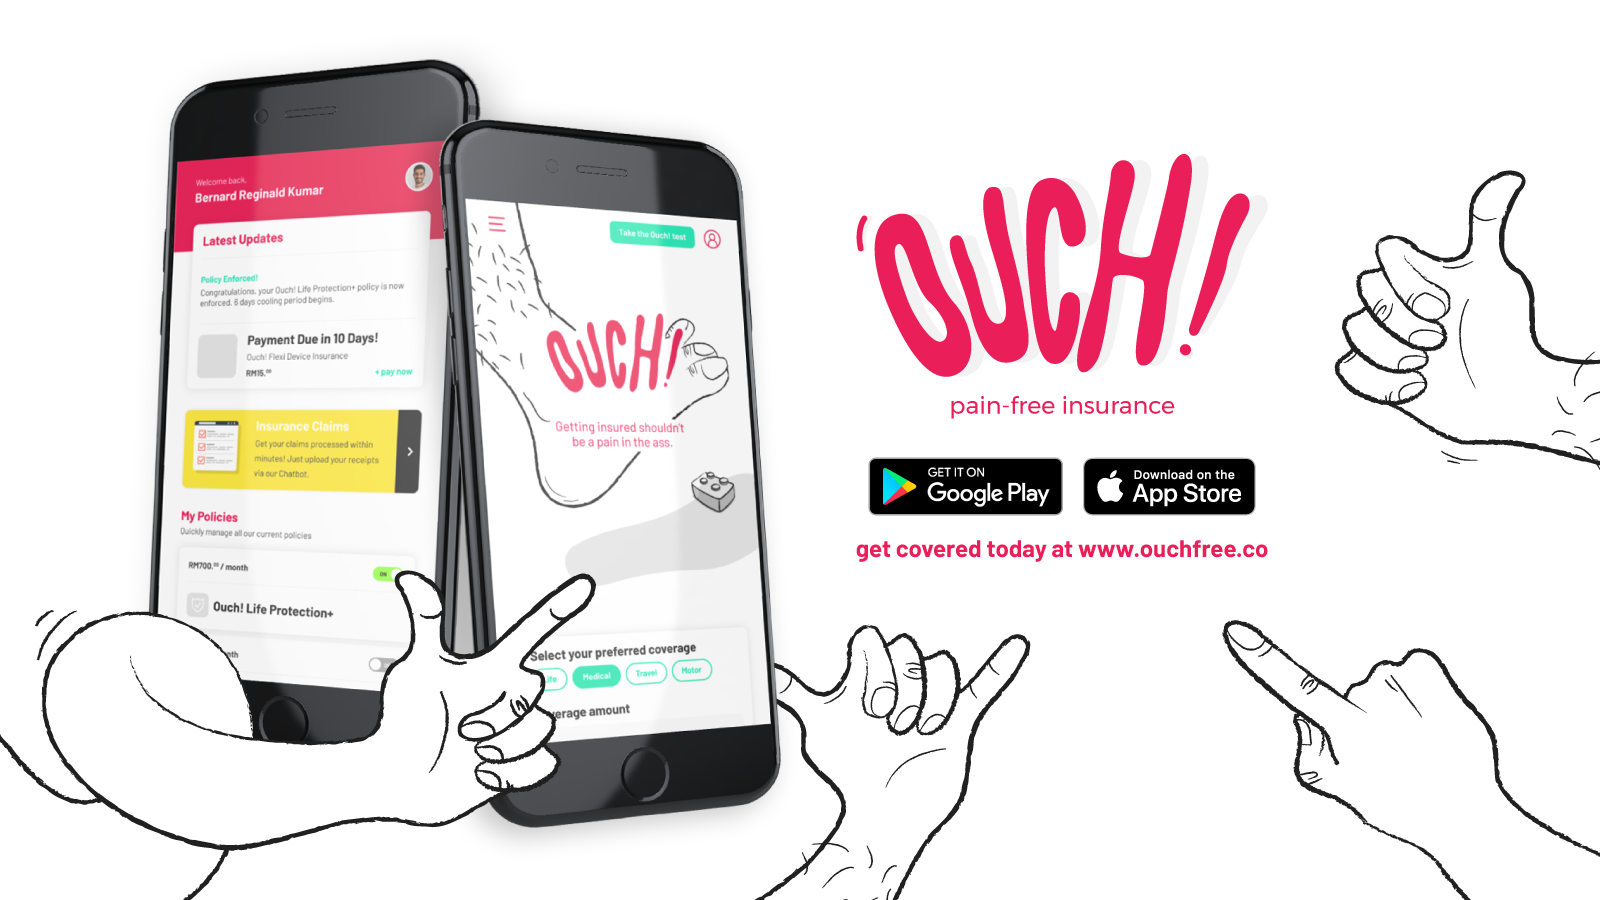 Digital insurance player Ouch! secures US$364K seed funding 